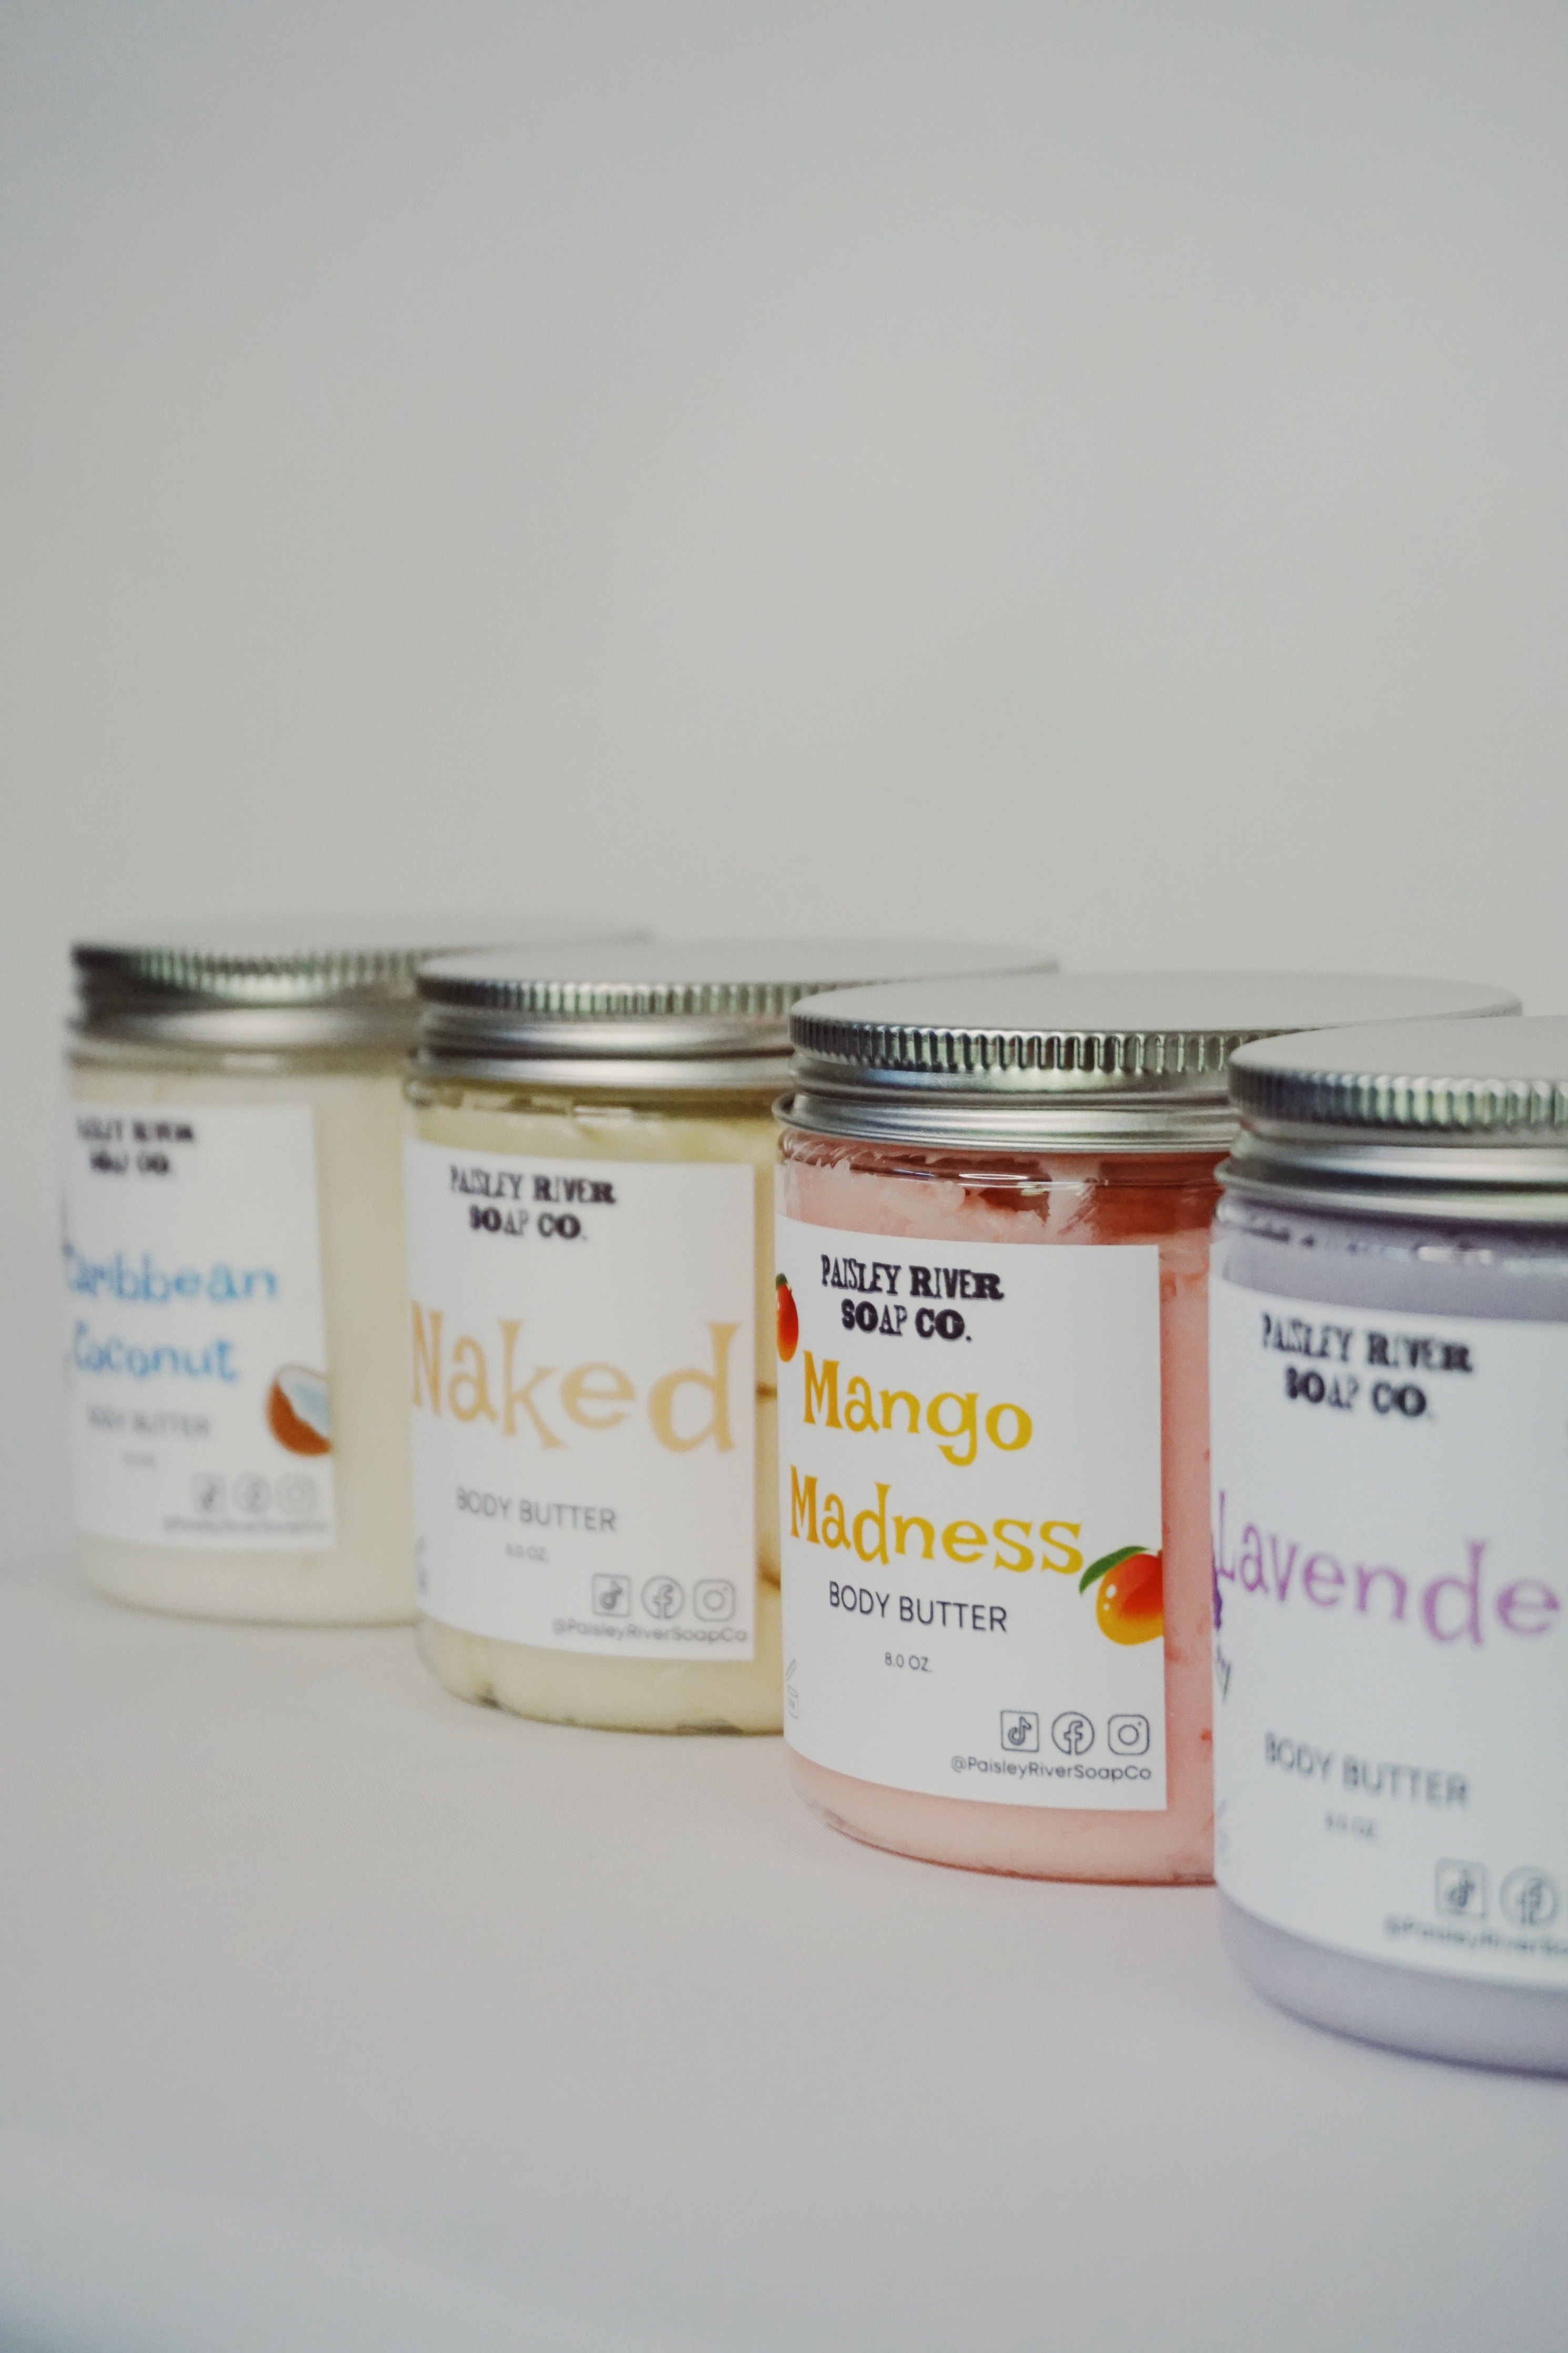 Caribbean Coconut, Naked, Mango Madness, and Lavender Body Butters.